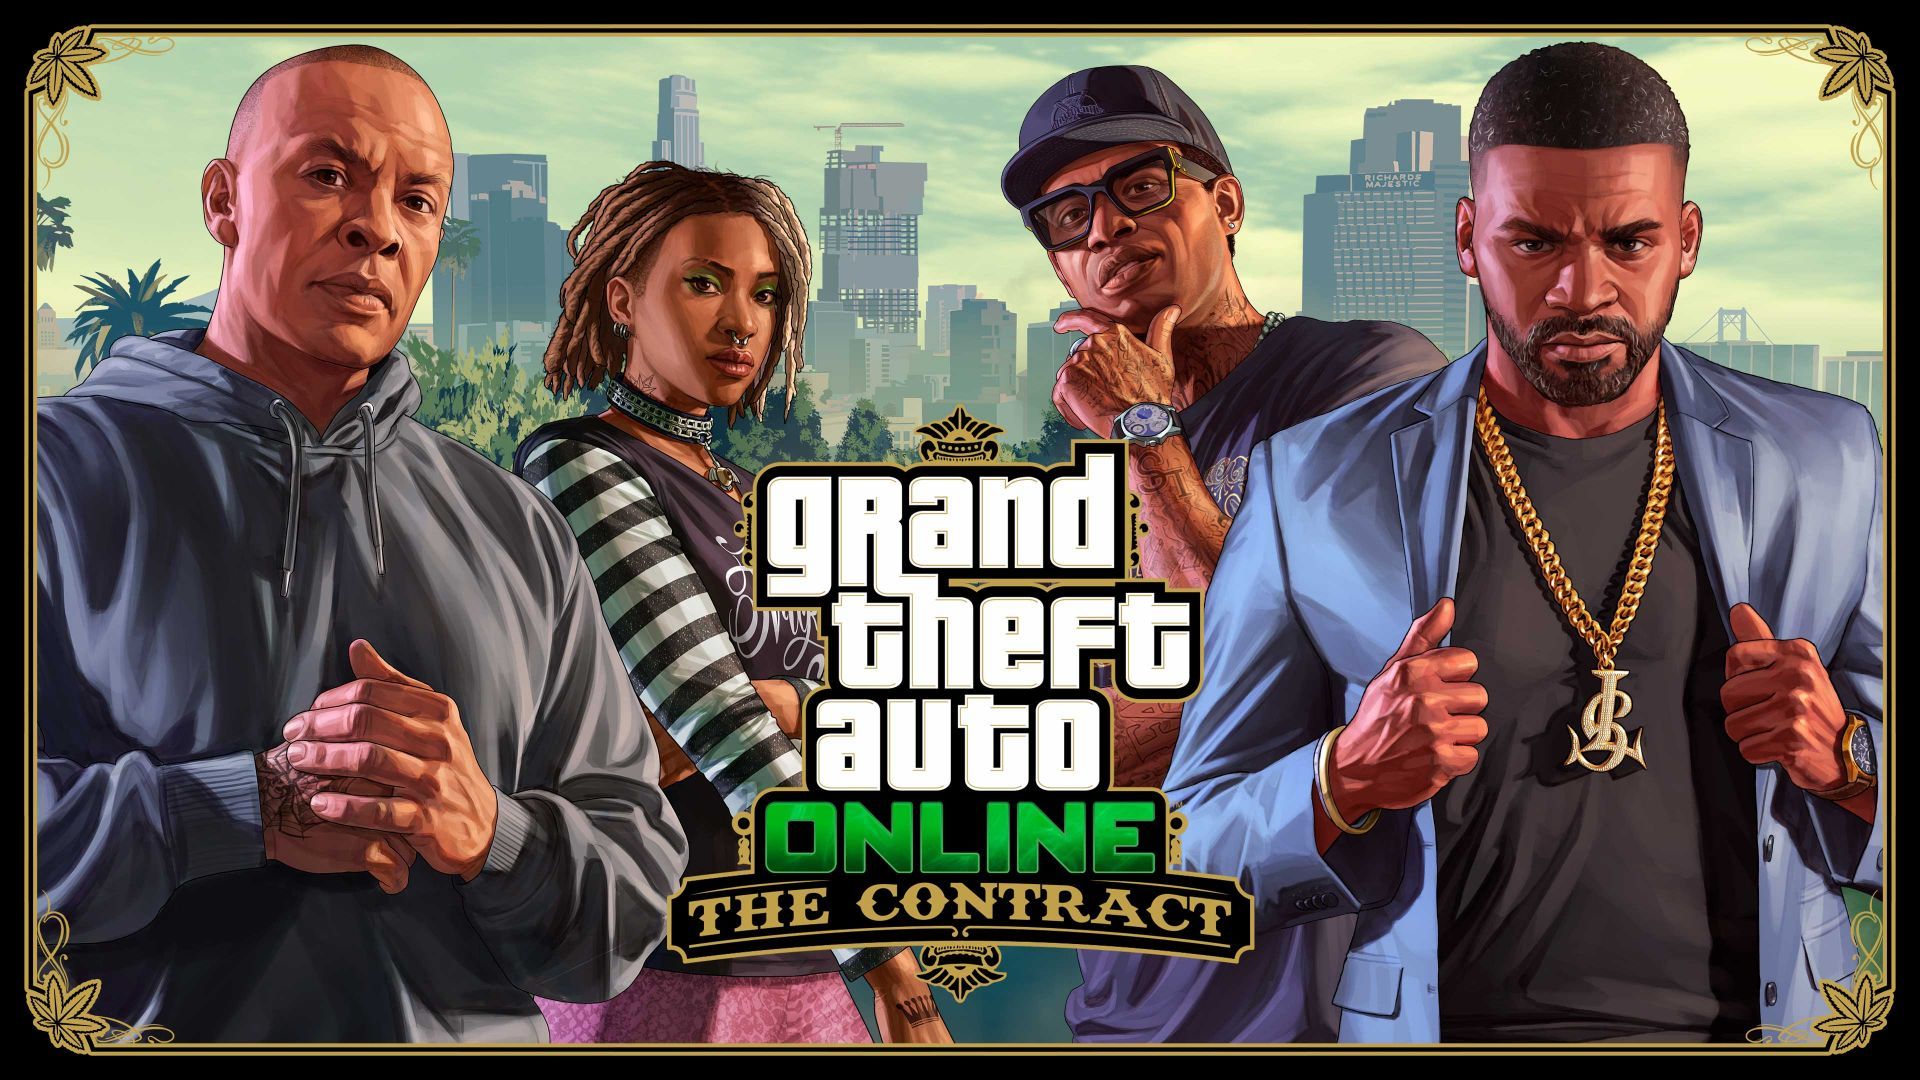 Introducing The Contract, a New GTA Online Story Featuring Franklin Clinton and Friends - Rockstar Games